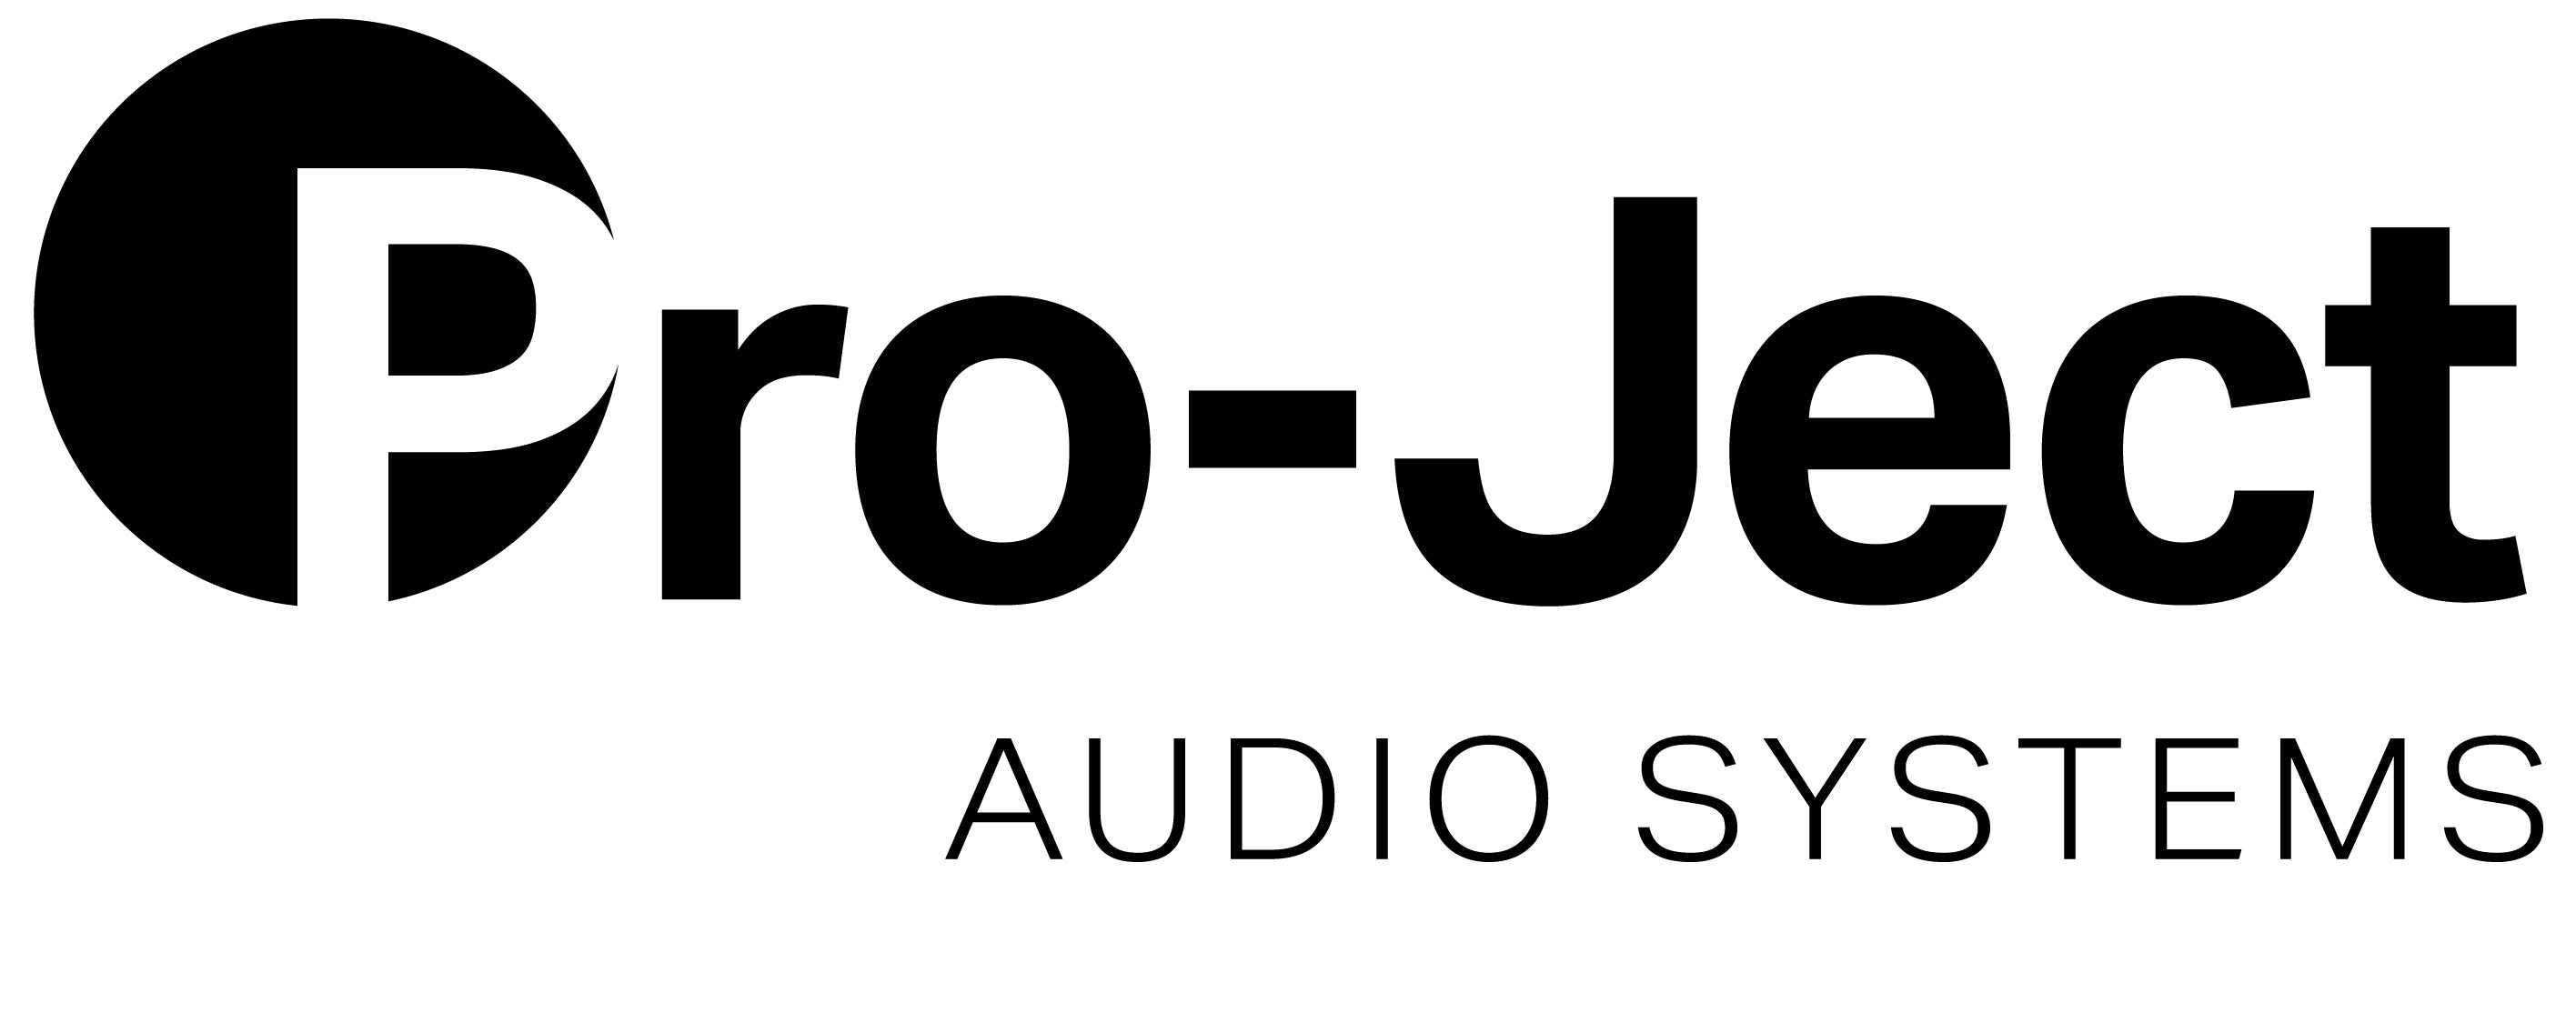 Pro-ject Audio Systems logo